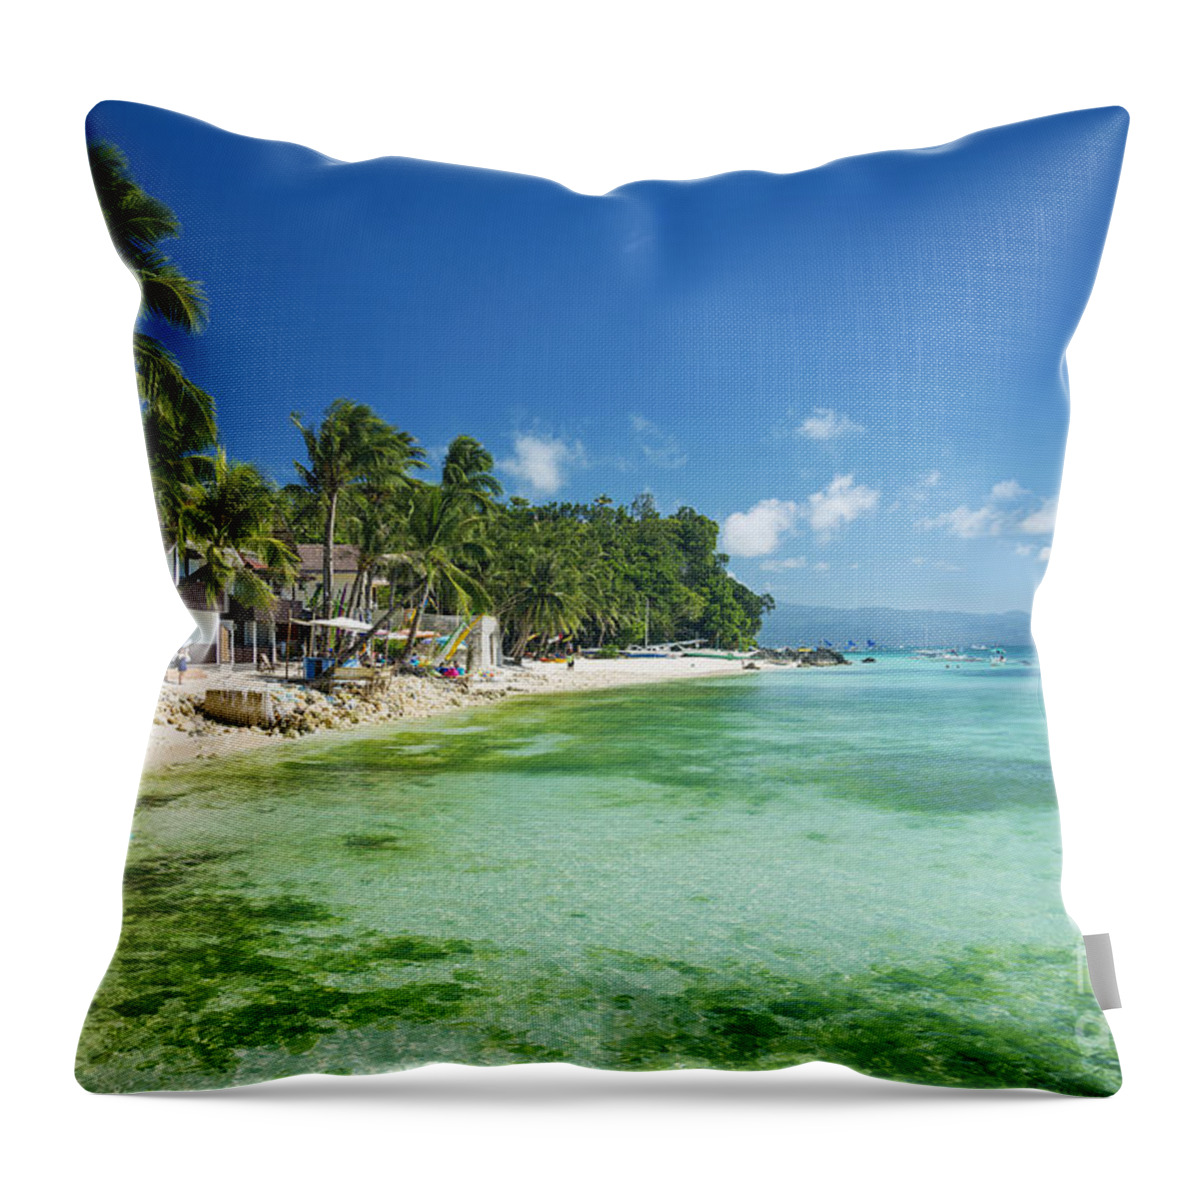 Asia Throw Pillow featuring the photograph Diniwid Tropical Beach In Boracay Island Philippines by JM Travel Photography